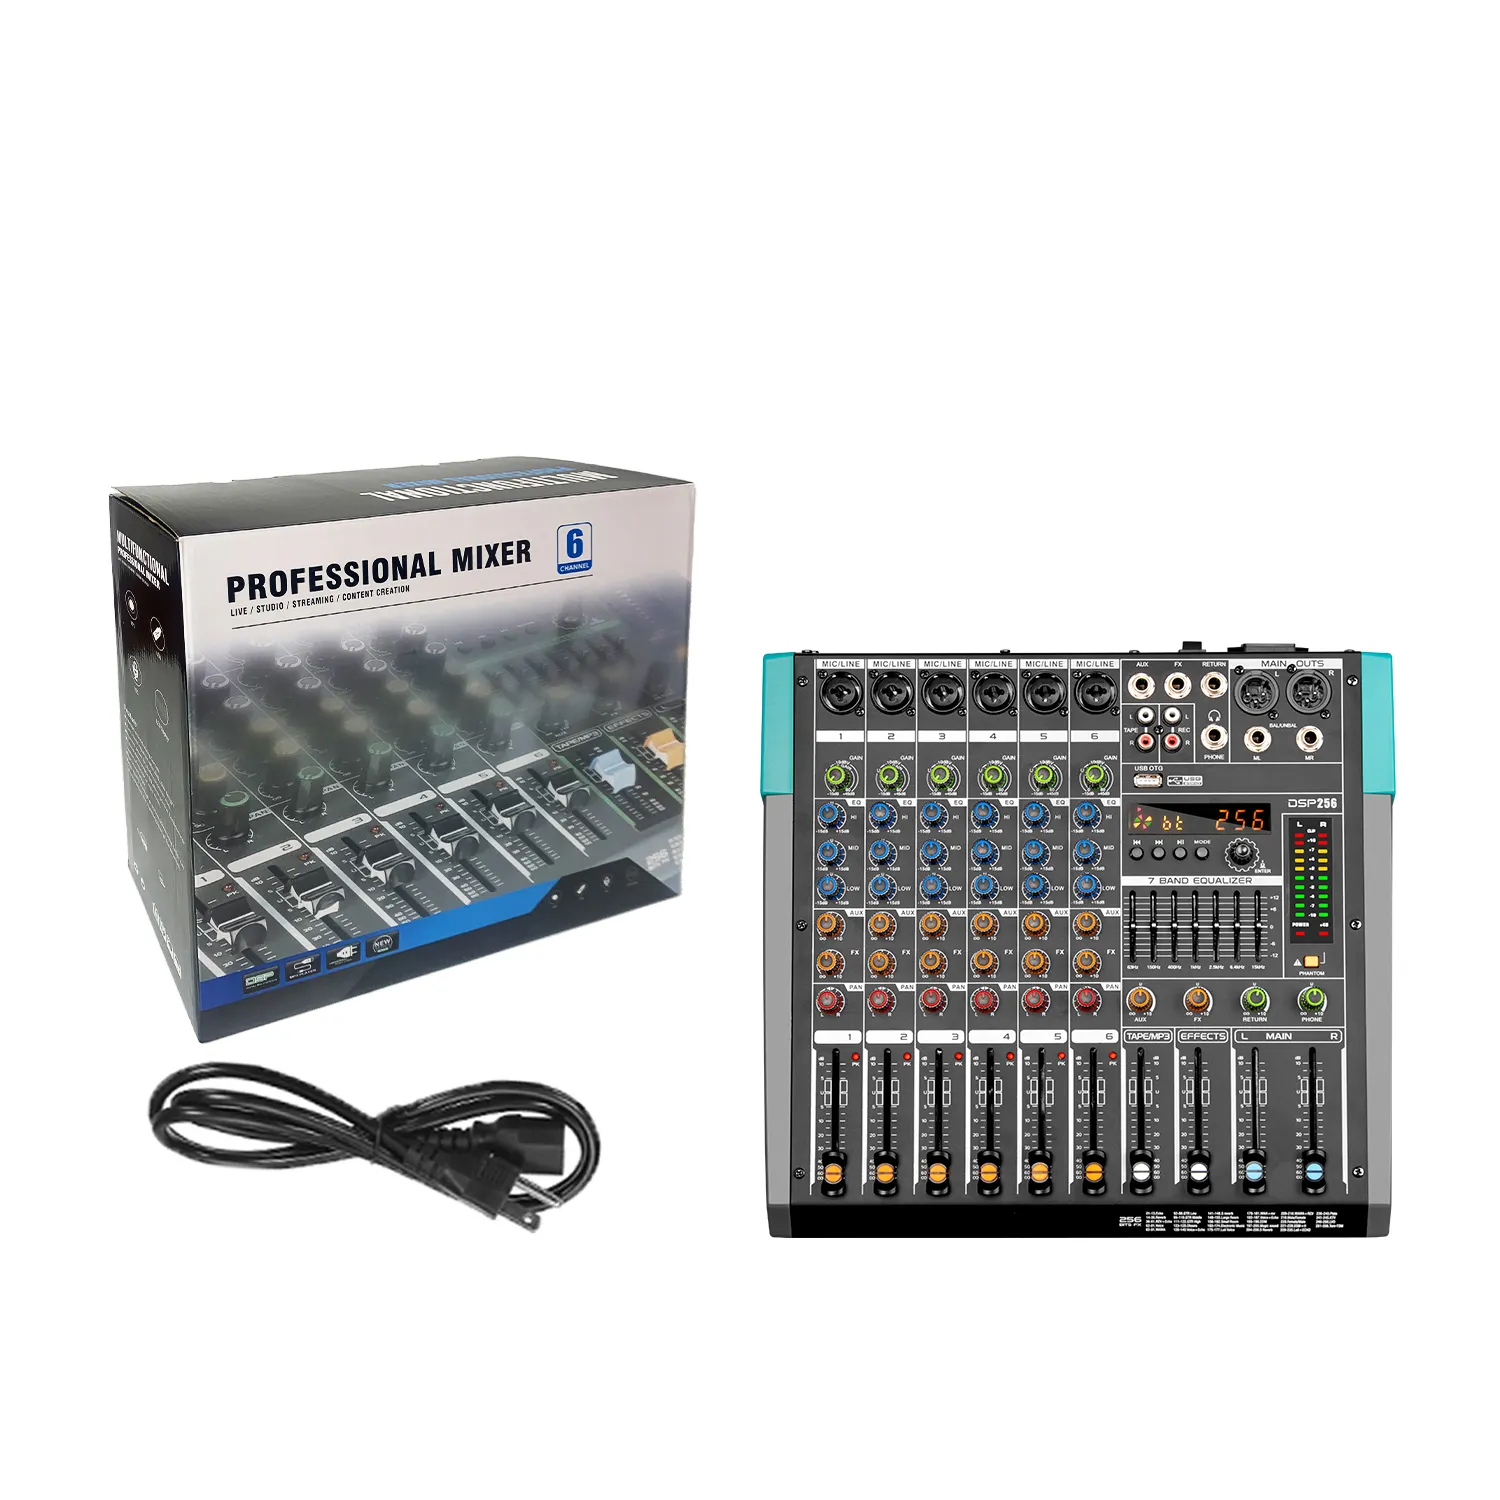 GAX-PA6 Audio Mixer Sound Board Mixing Console with 6 Channel Digital USB BT Reverb Delay Effect Input Stereo DJ Mixer